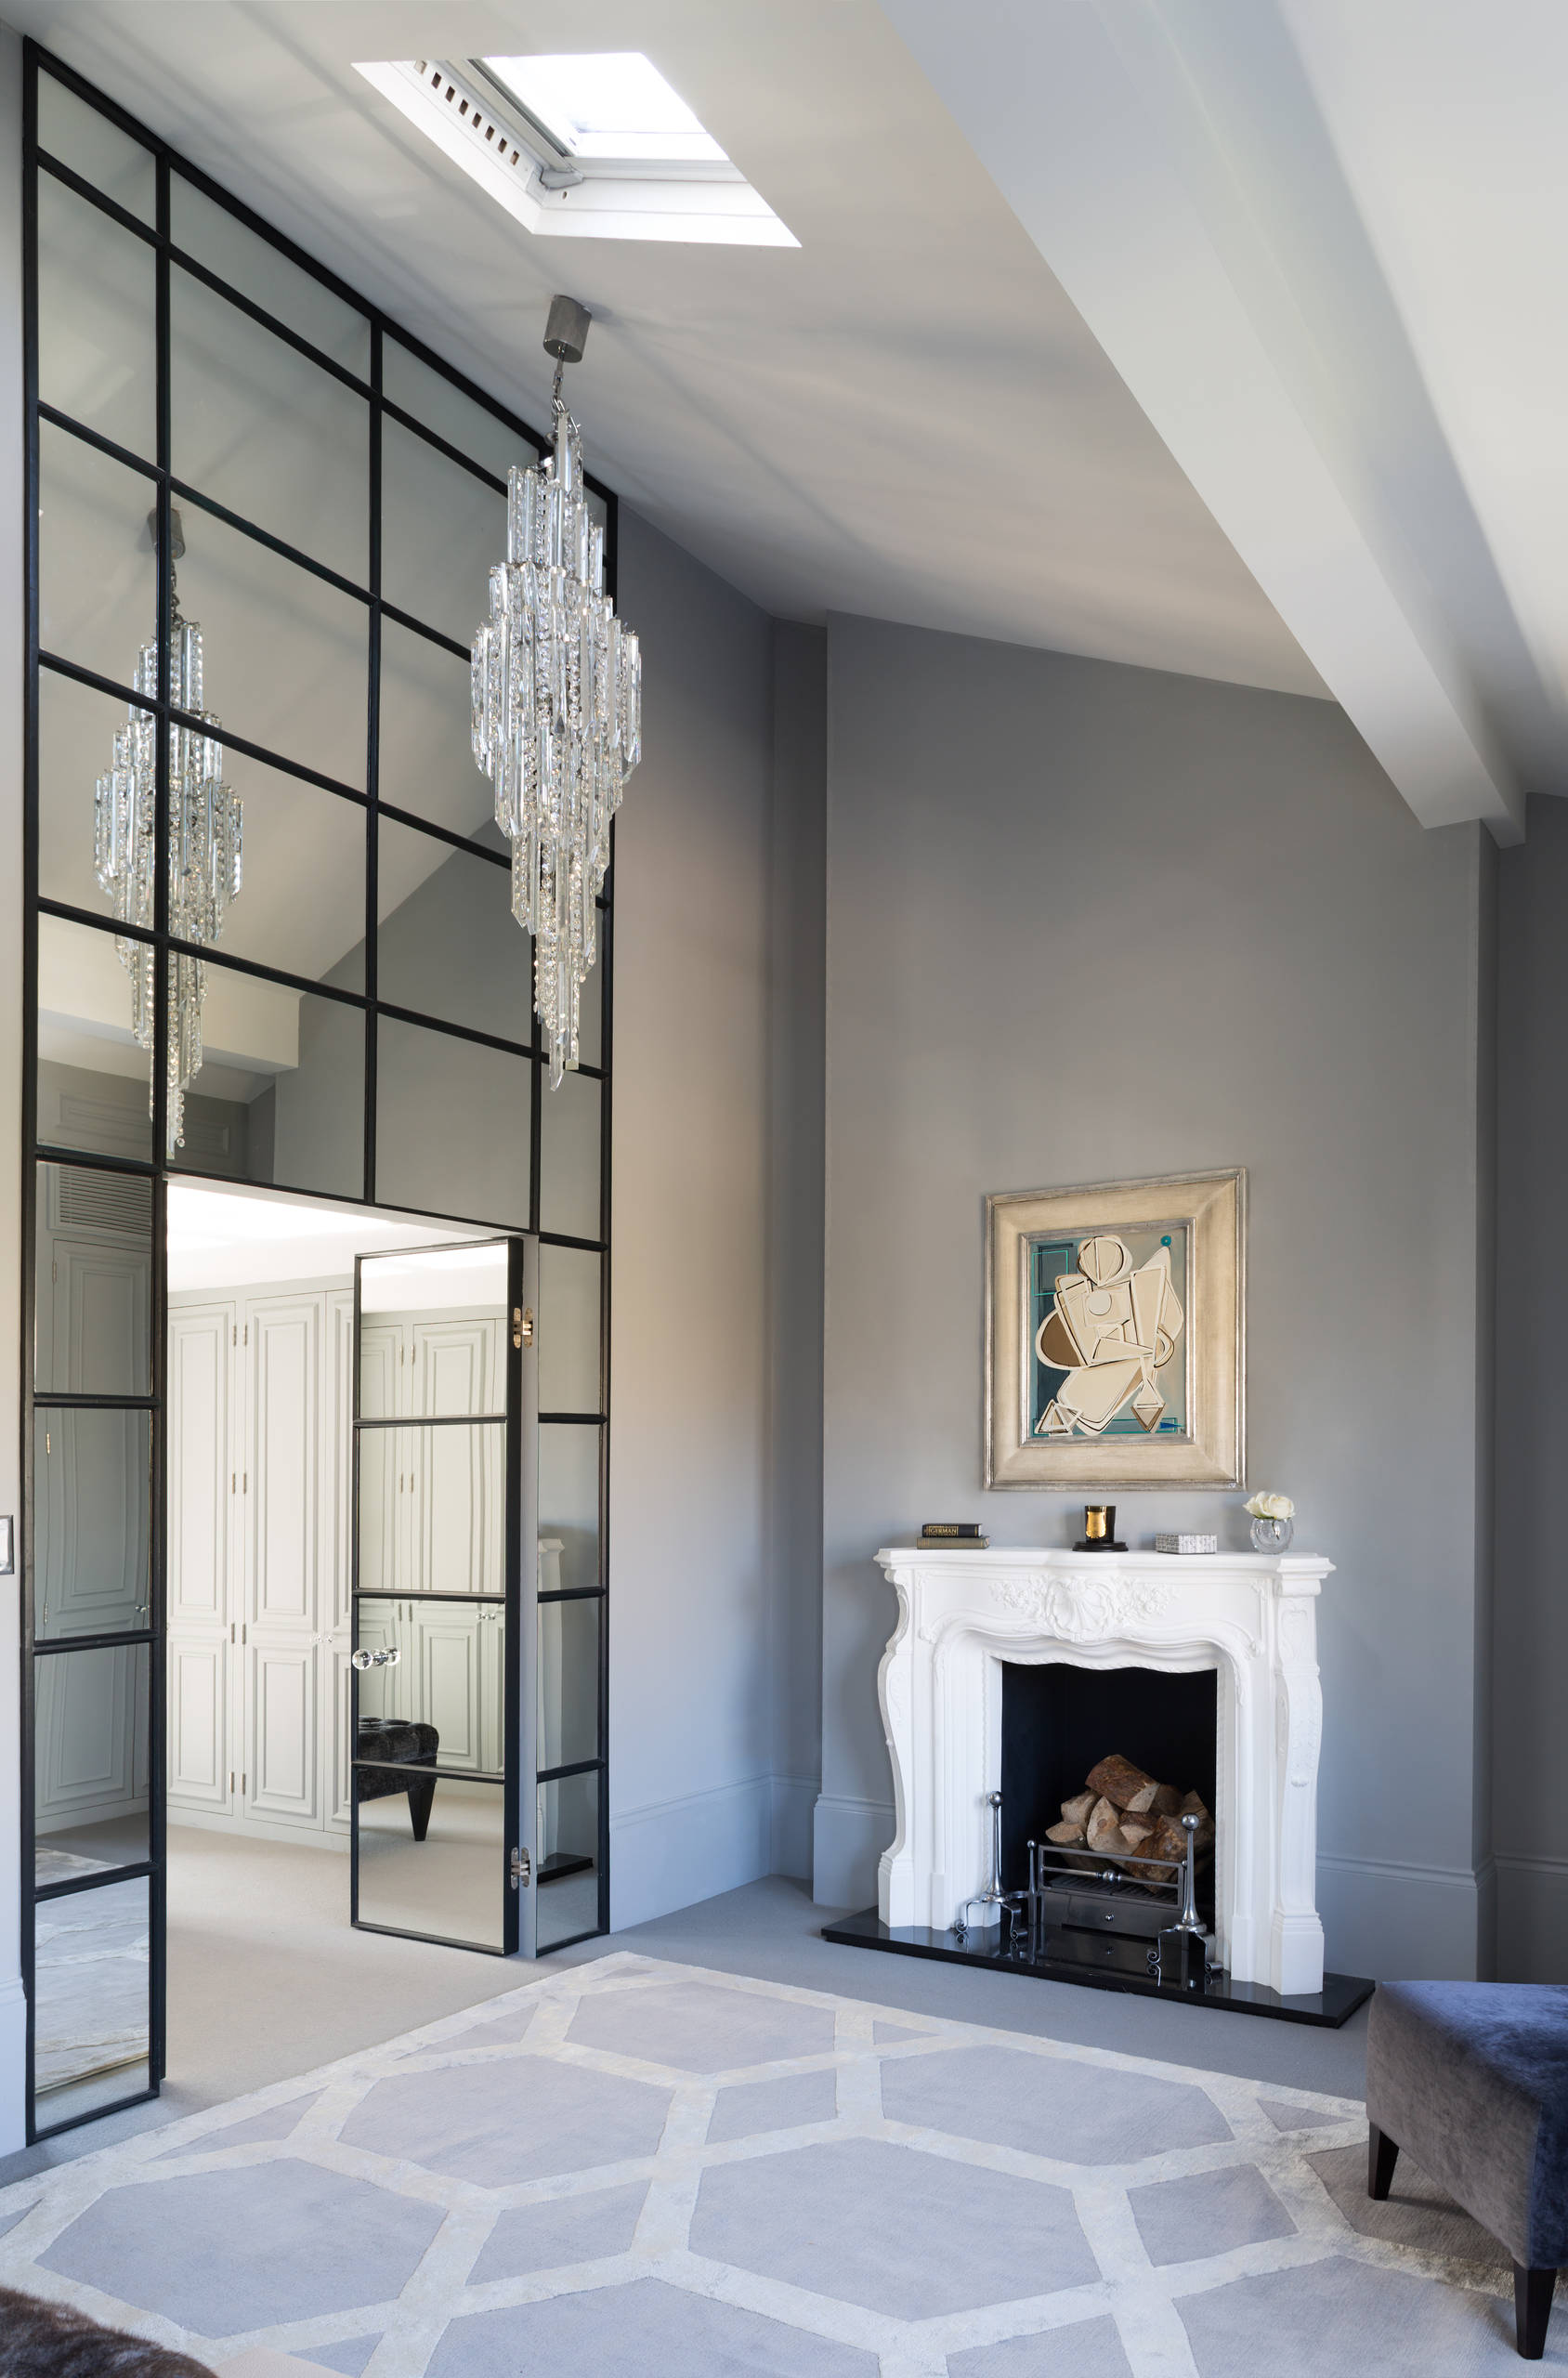 10 Cool Ways With Mirrored Walls Houzz Uk, Whole Wall Covered Mirror